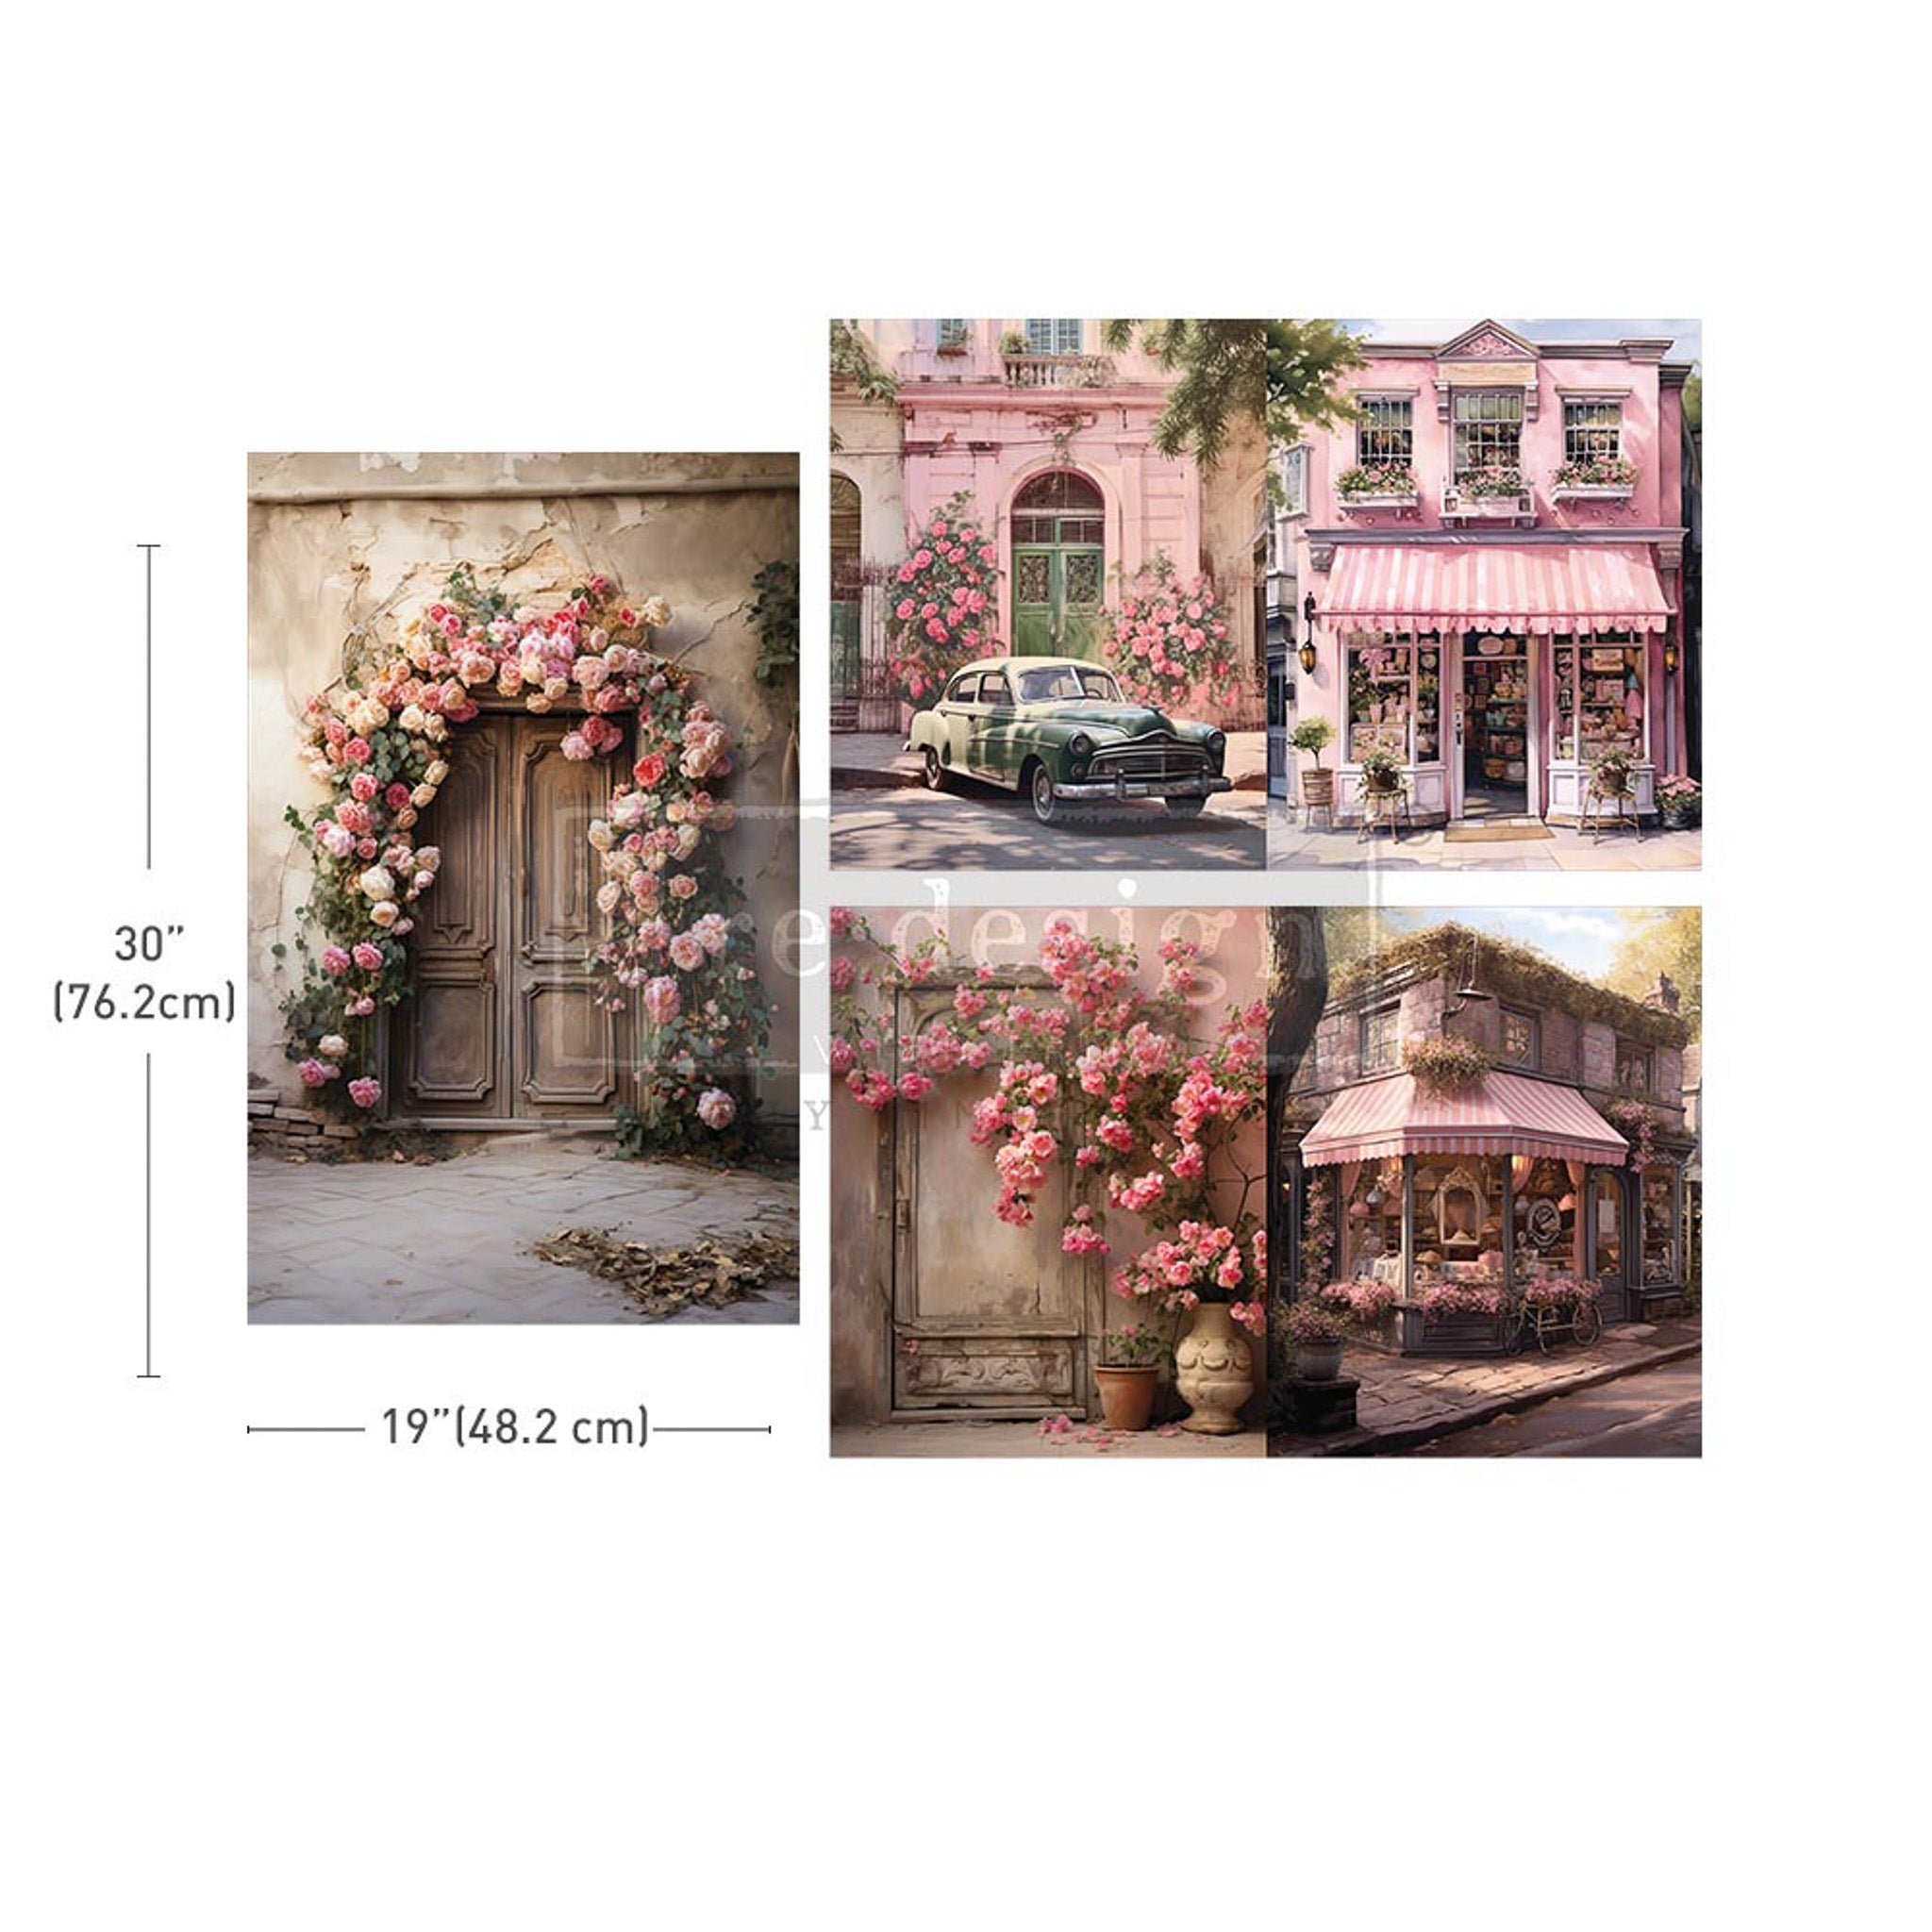 3 sheets of ReDesign with Prima's Blush Blossom Boulevard tissue paper featuring colorful flower designs, quaint homes, and vintage storefronts against a white background. Measurements for 1 sheet reads 30" (76.2 cm) by 19" (48.2 cm).